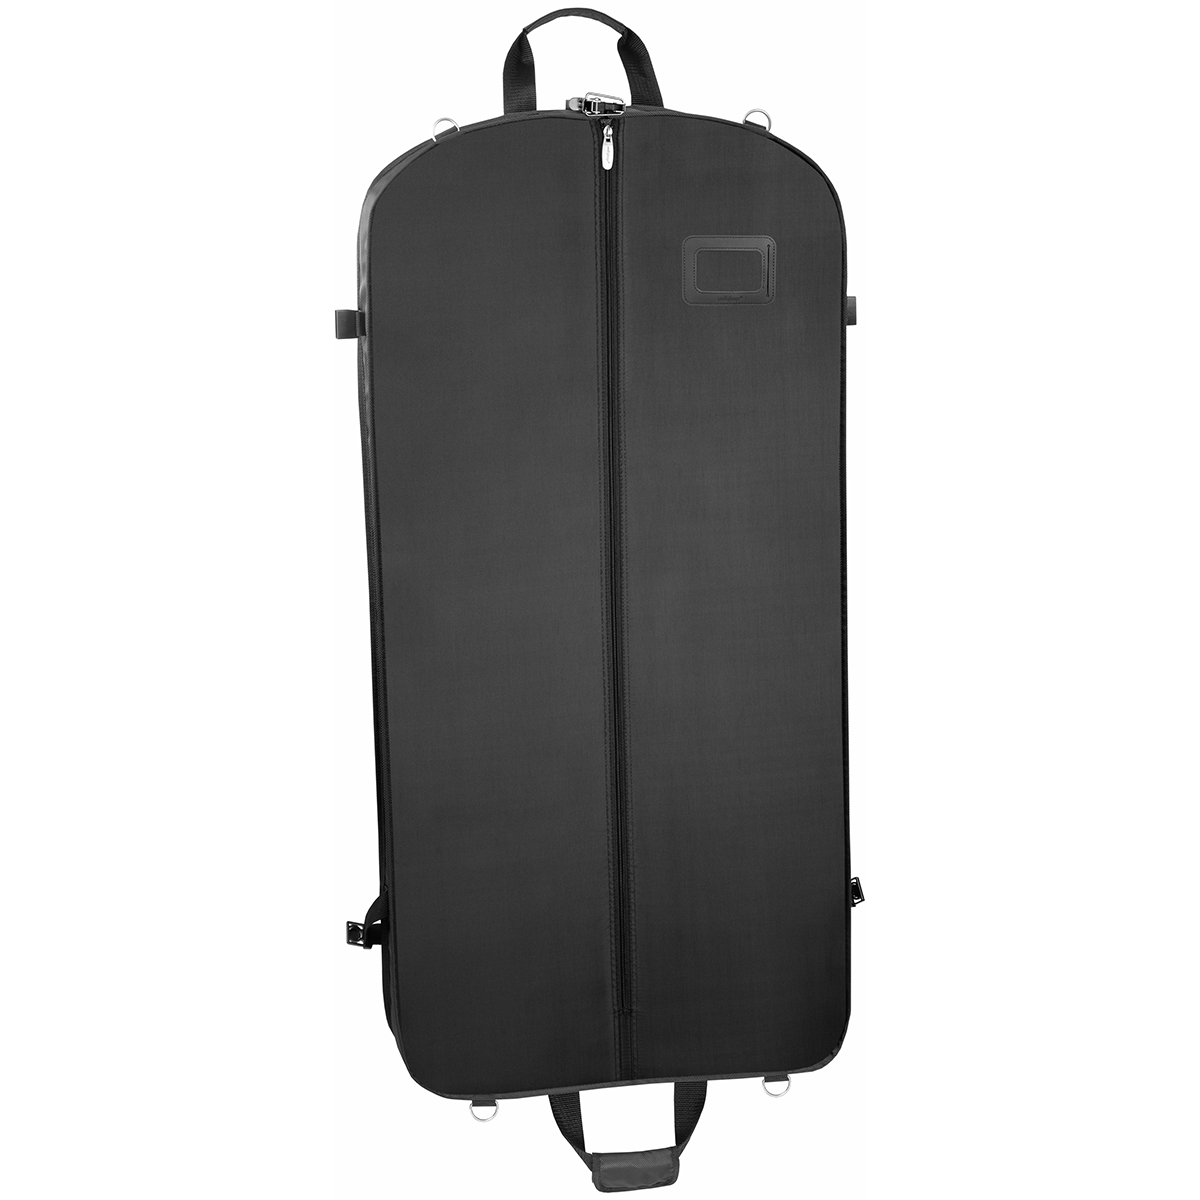 WallyBags(R) 42in. Premium Garment Bag With Shoulder Strap